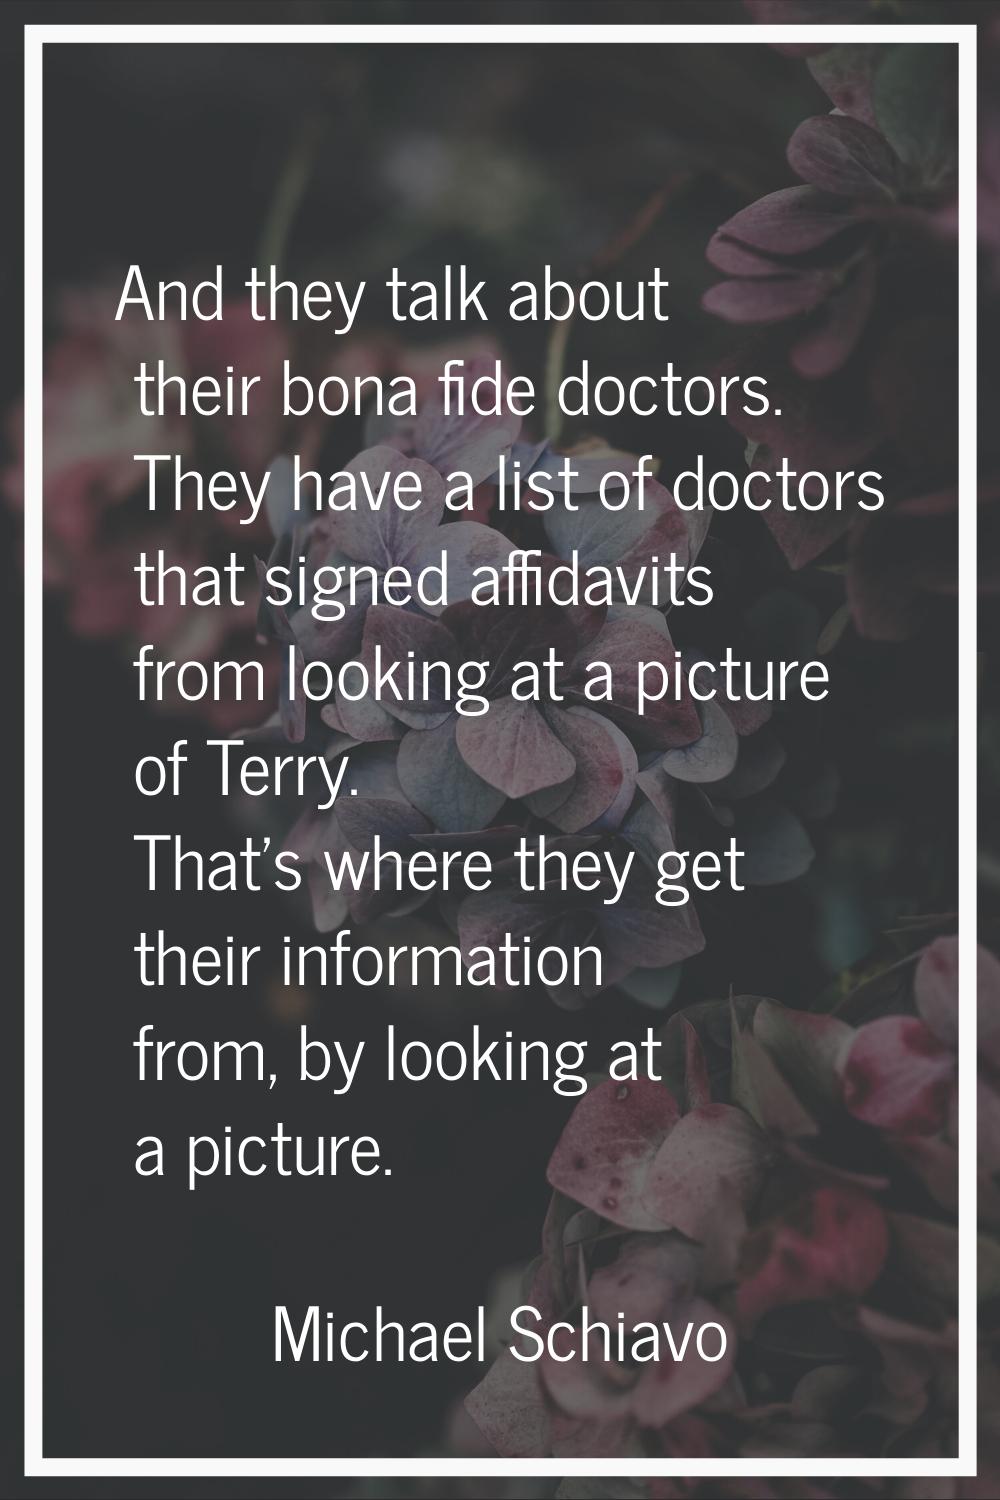 And they talk about their bona fide doctors. They have a list of doctors that signed affidavits fro